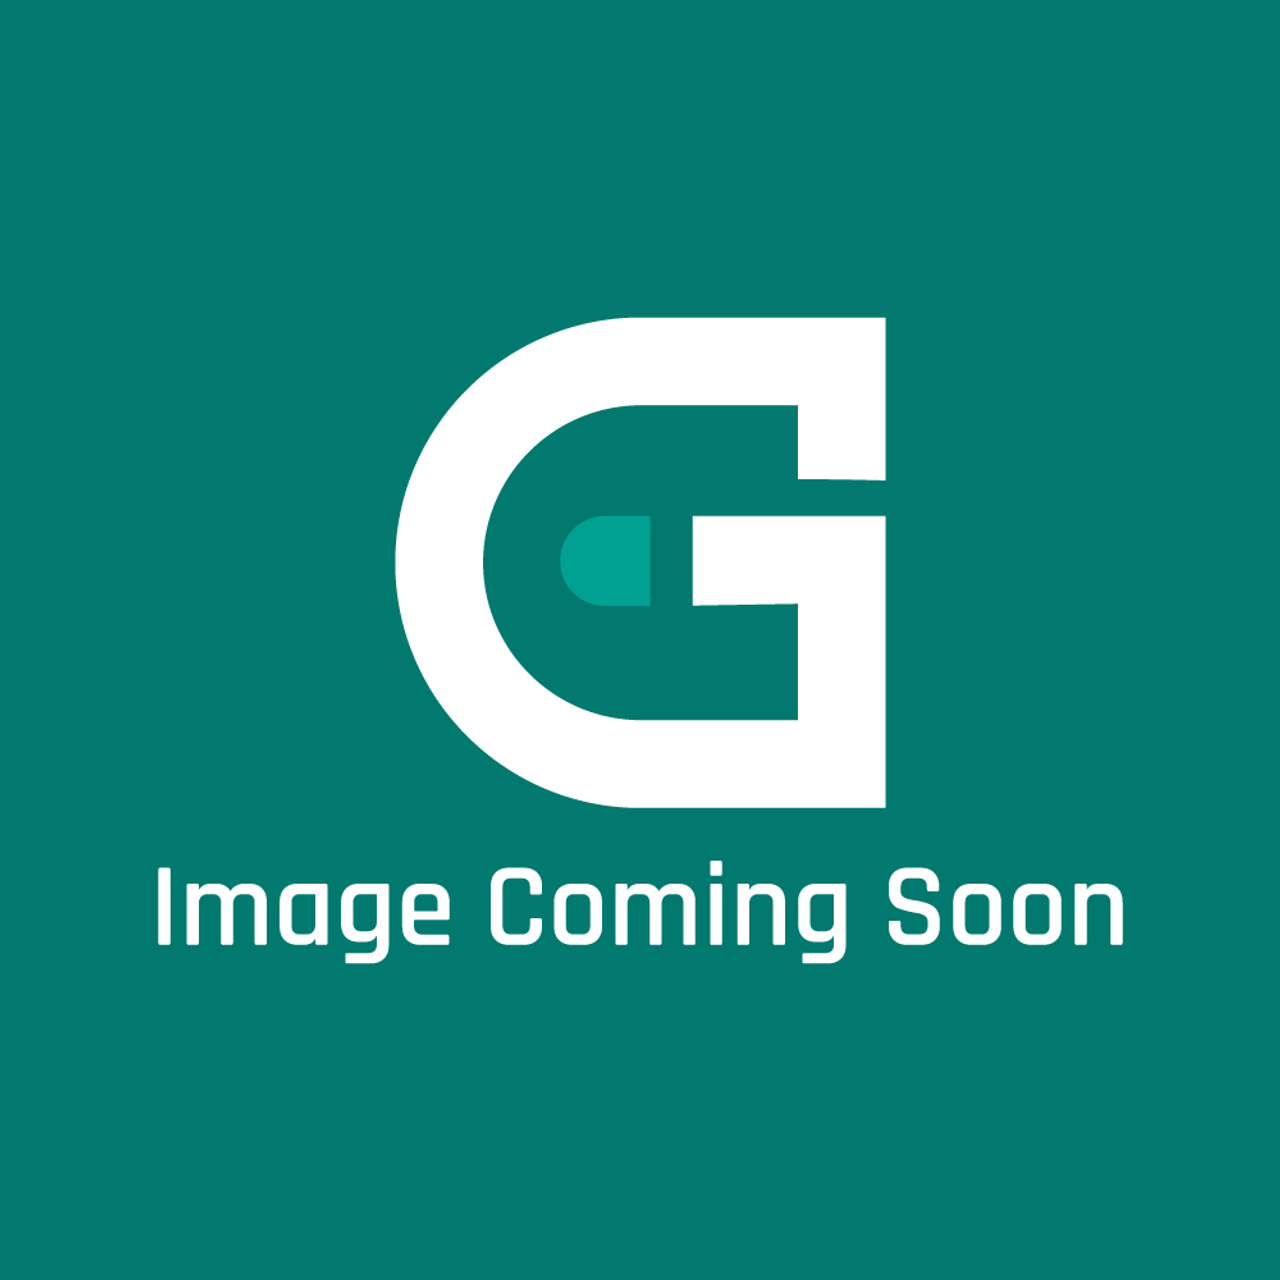 GE Appliances WJ69X30610 - Curtain Quickset - Image Coming Soon!